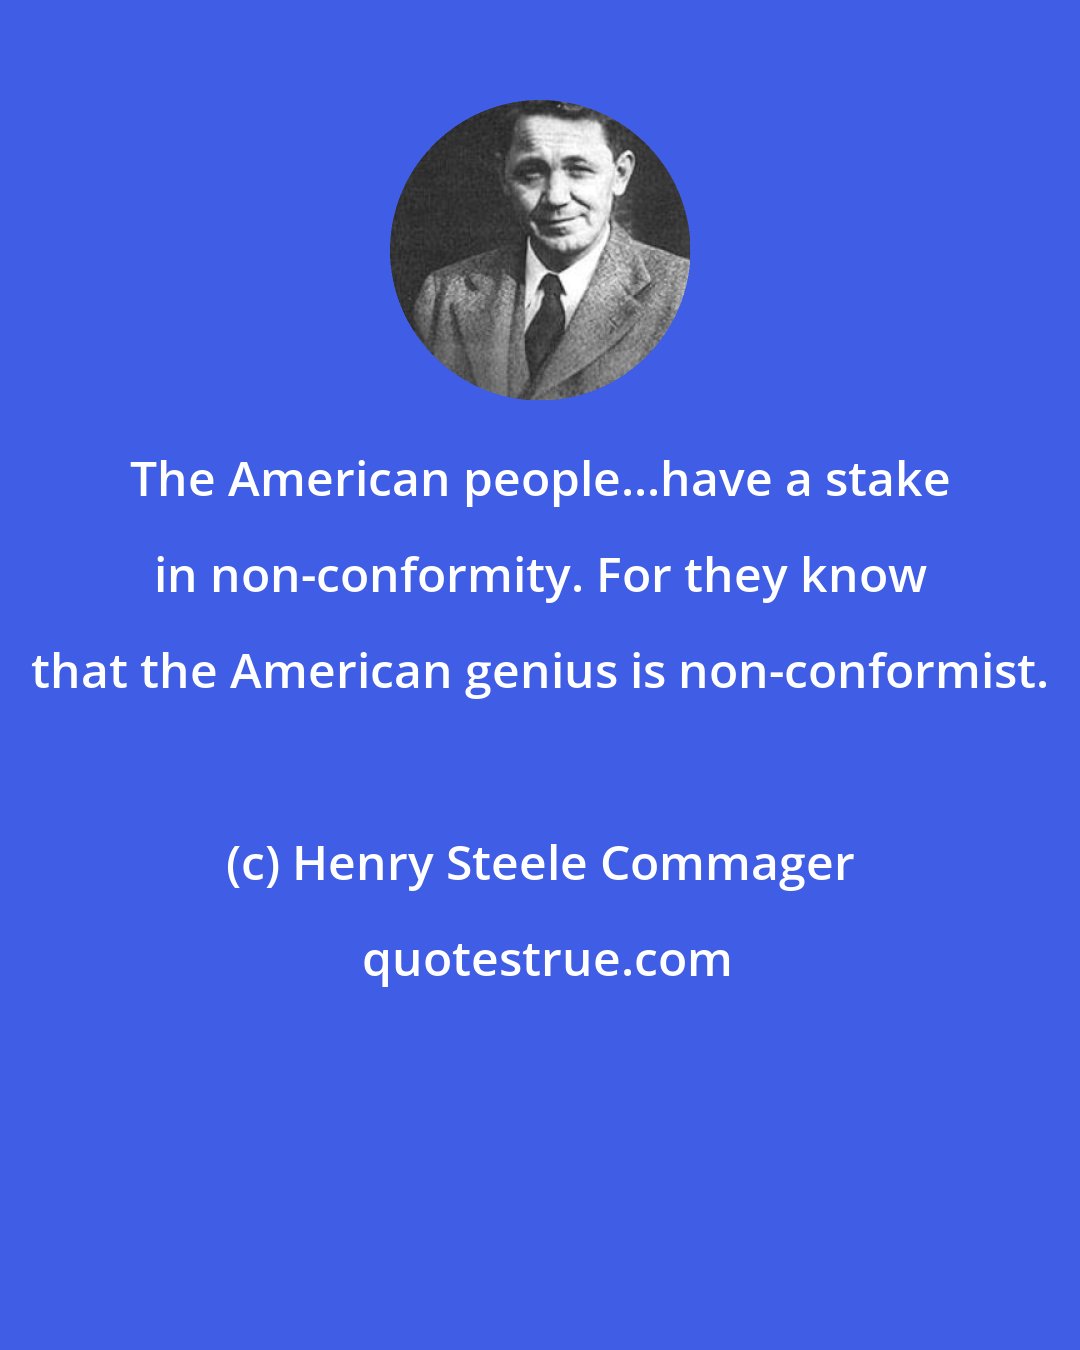 Henry Steele Commager: The American people...have a stake in non-conformity. For they know that the American genius is non-conformist.